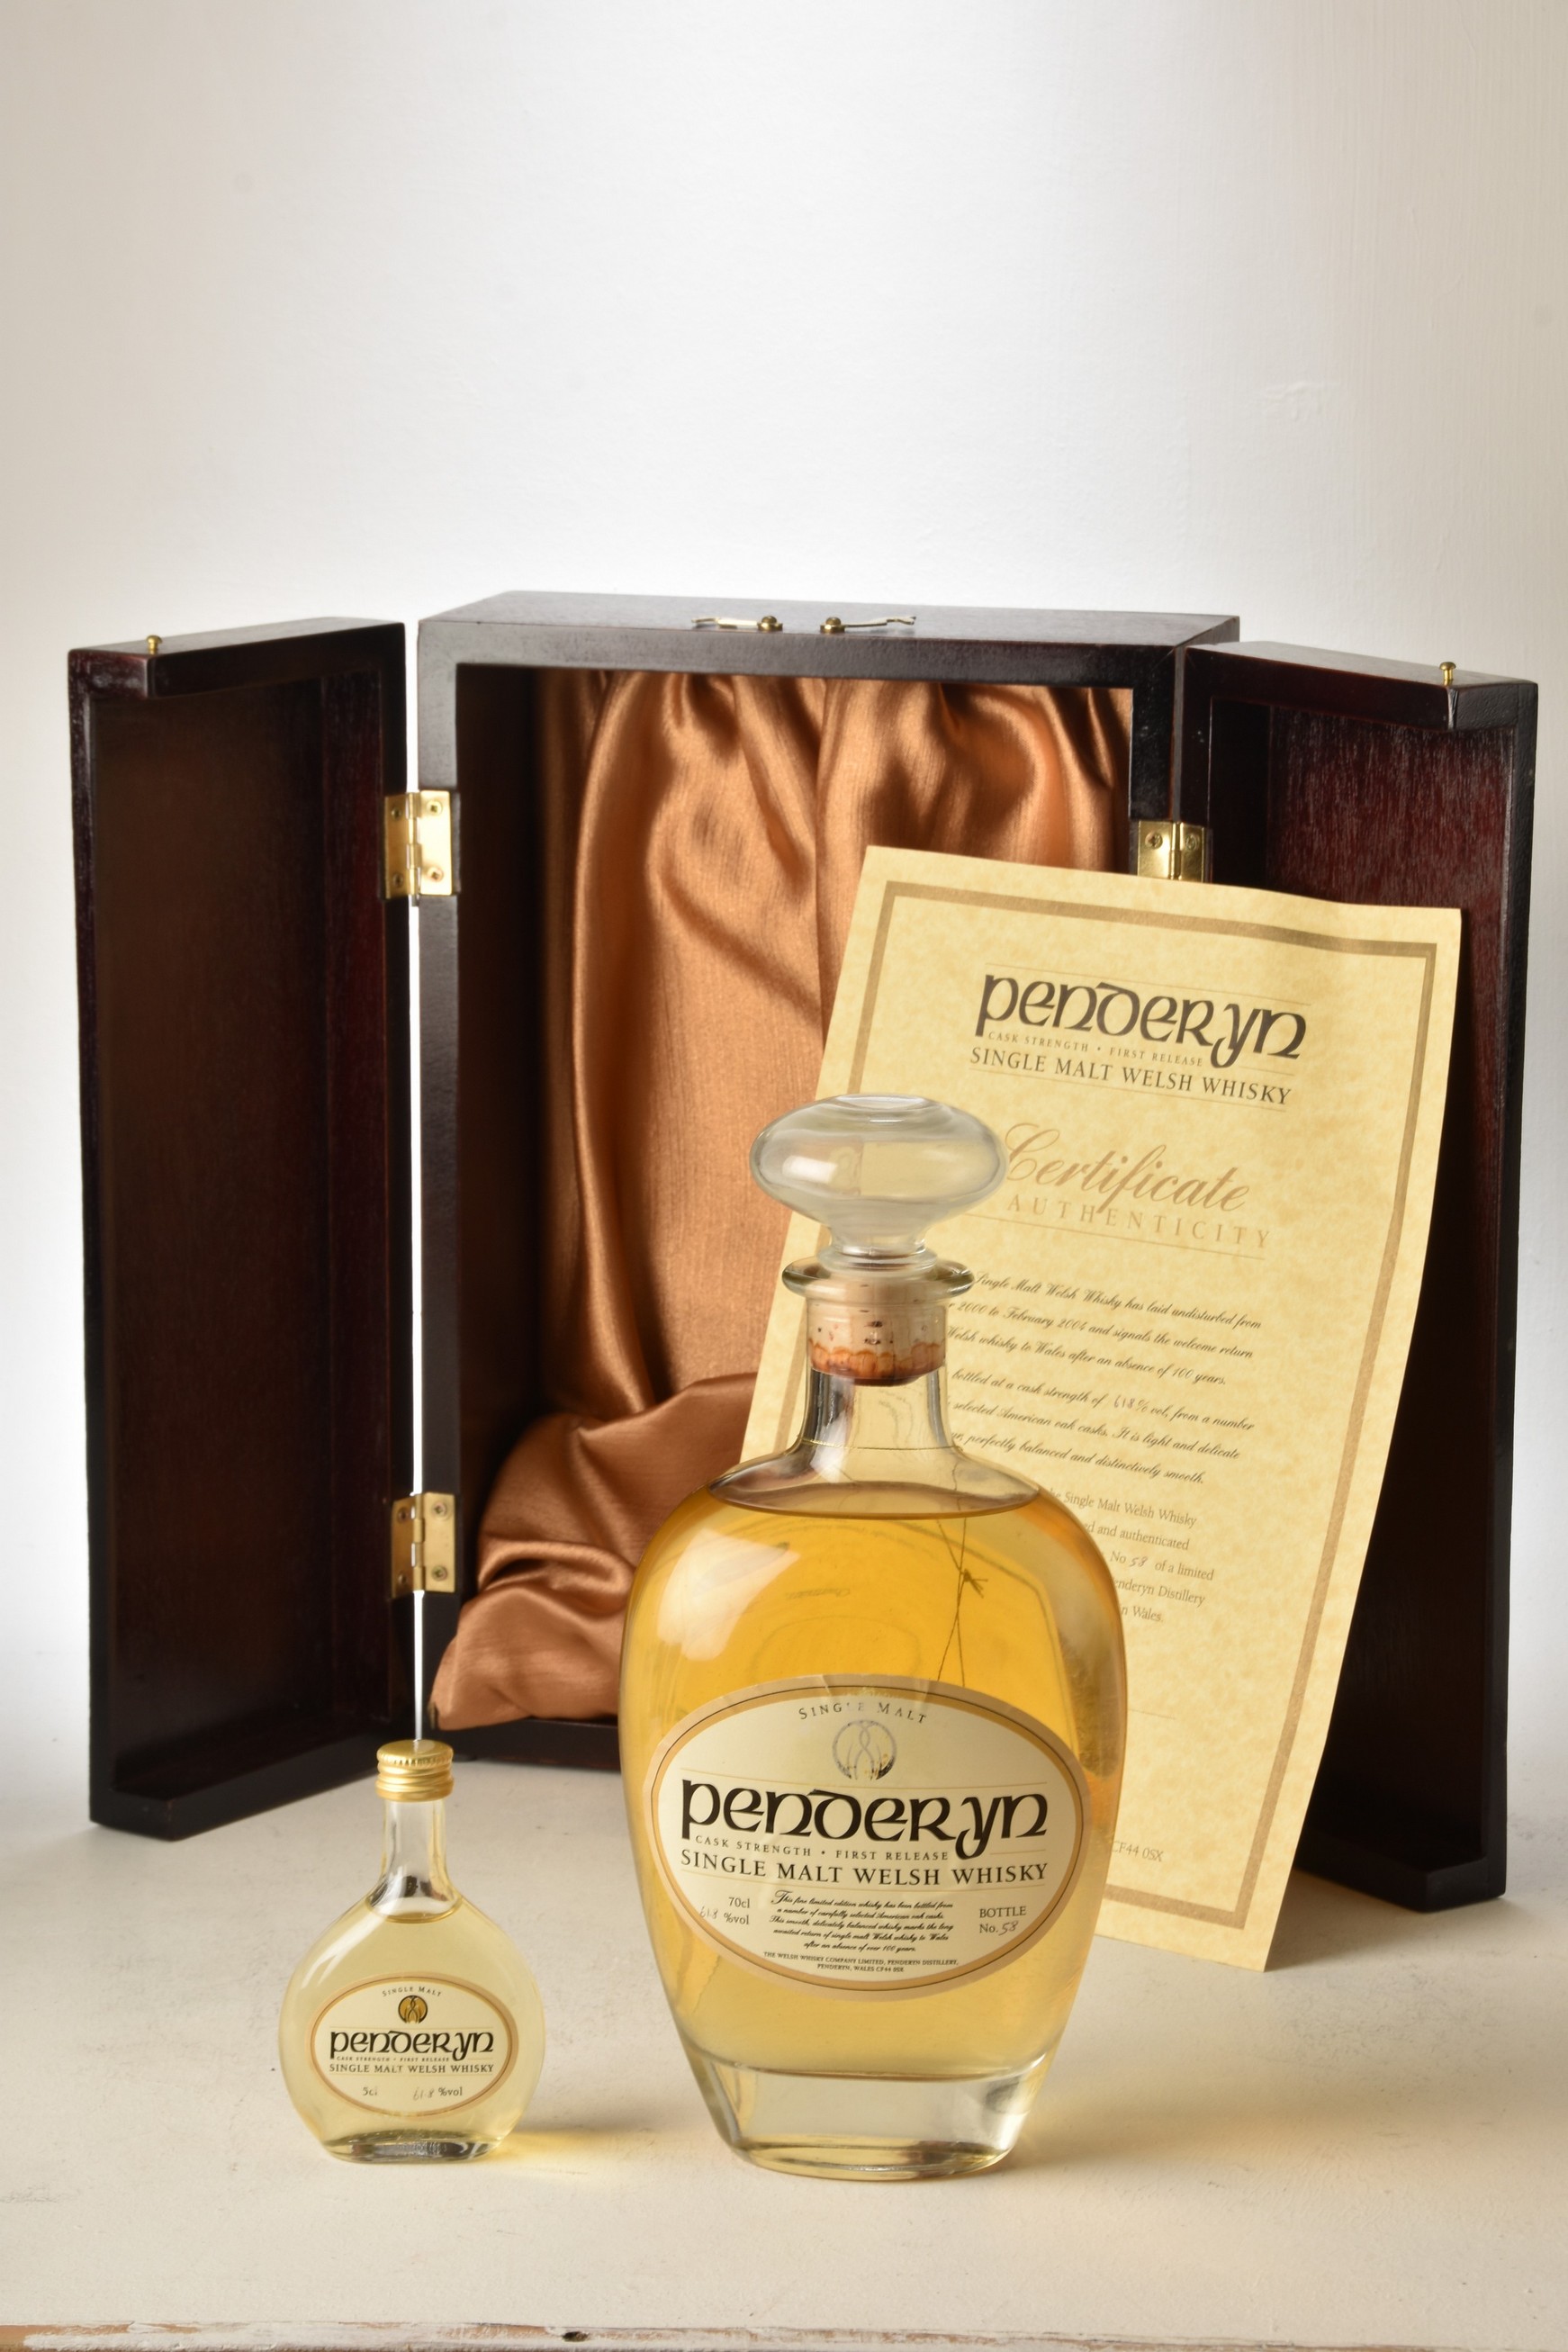 Penderyn Welsh Whisky First release 1 bt OWC